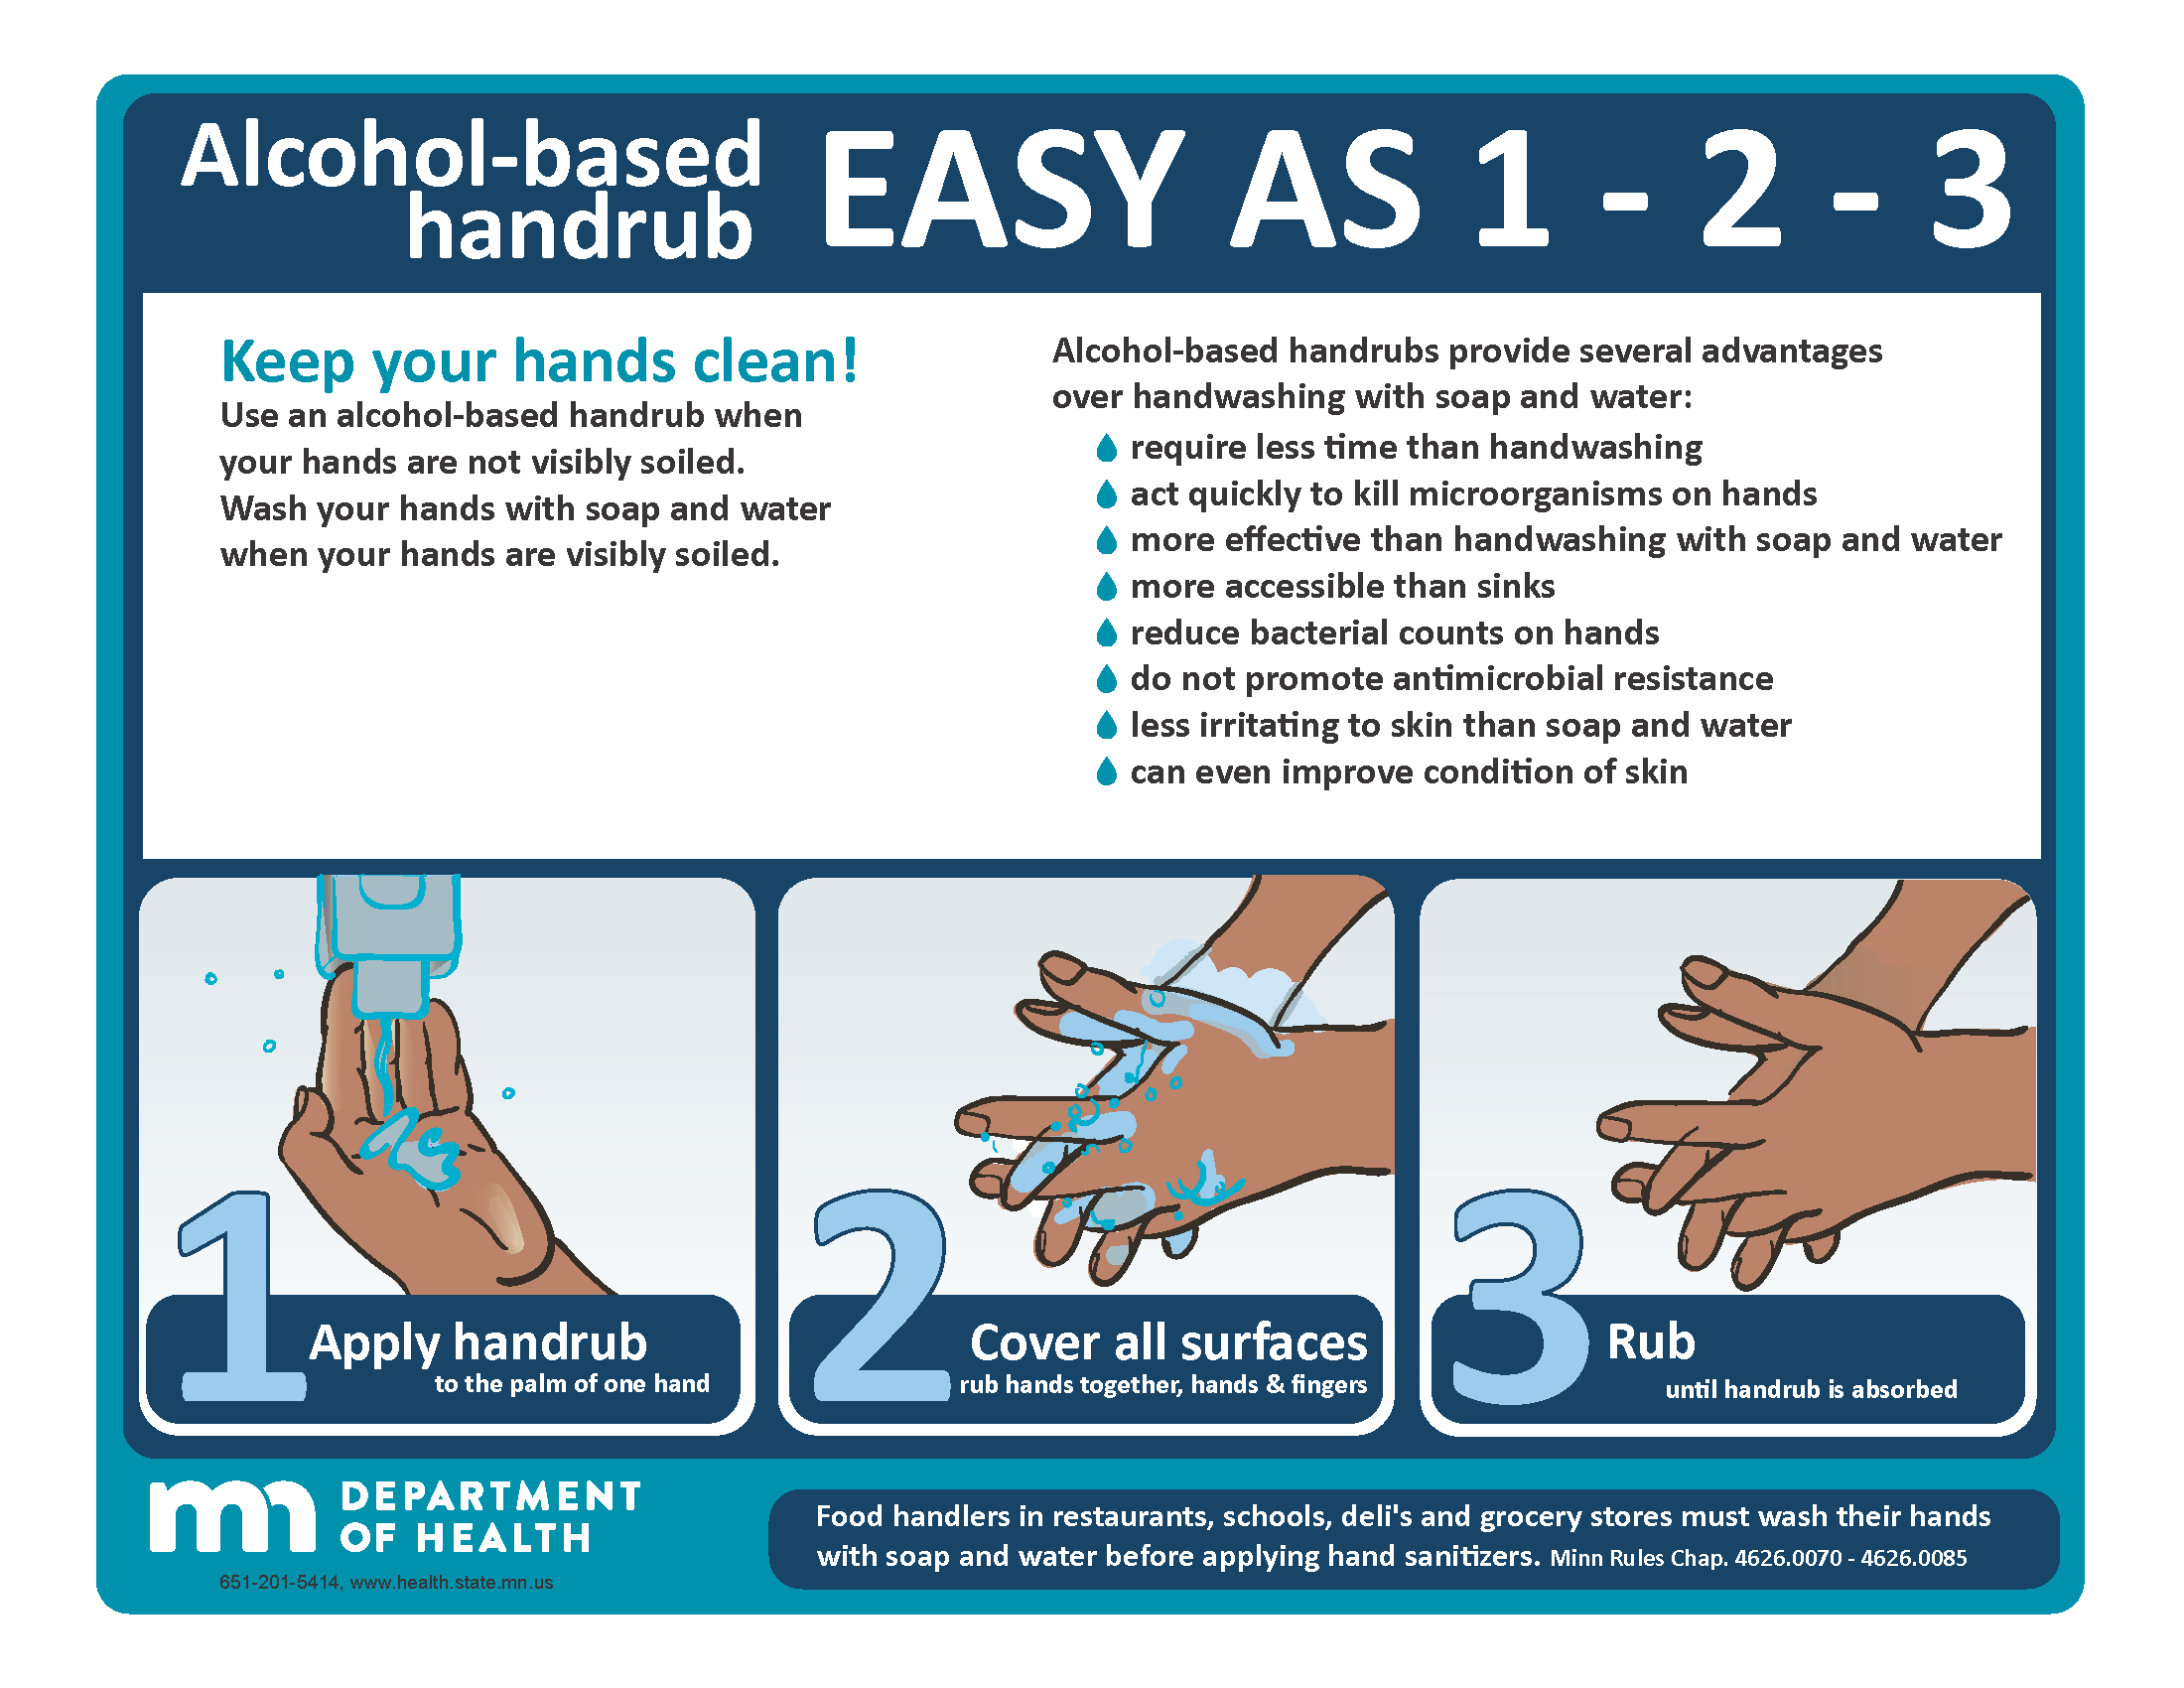 image of the Alcohol handrub easy as 1 2 3 Poster in color.